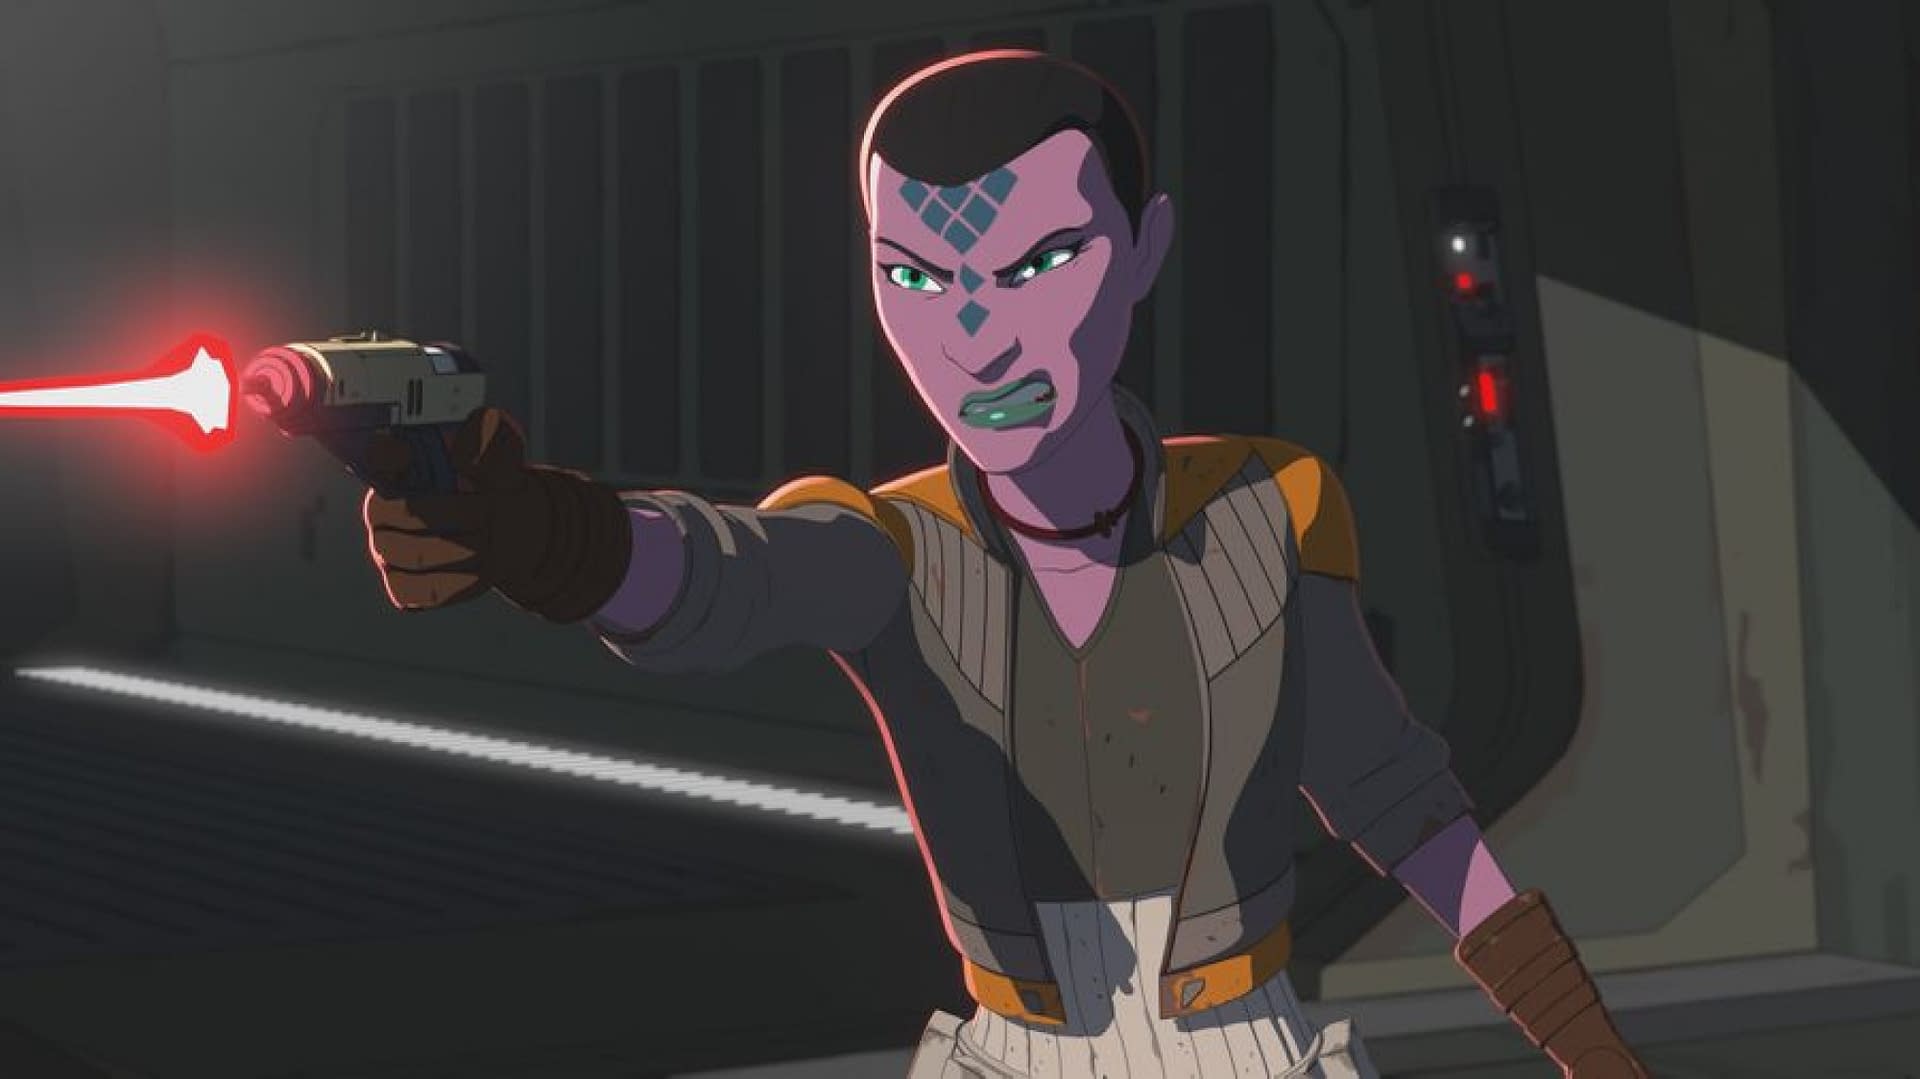 "Star Wars Resistance" Season 2 "The Engineer" &#8211; A Damsel In Distress [PREVIEW]